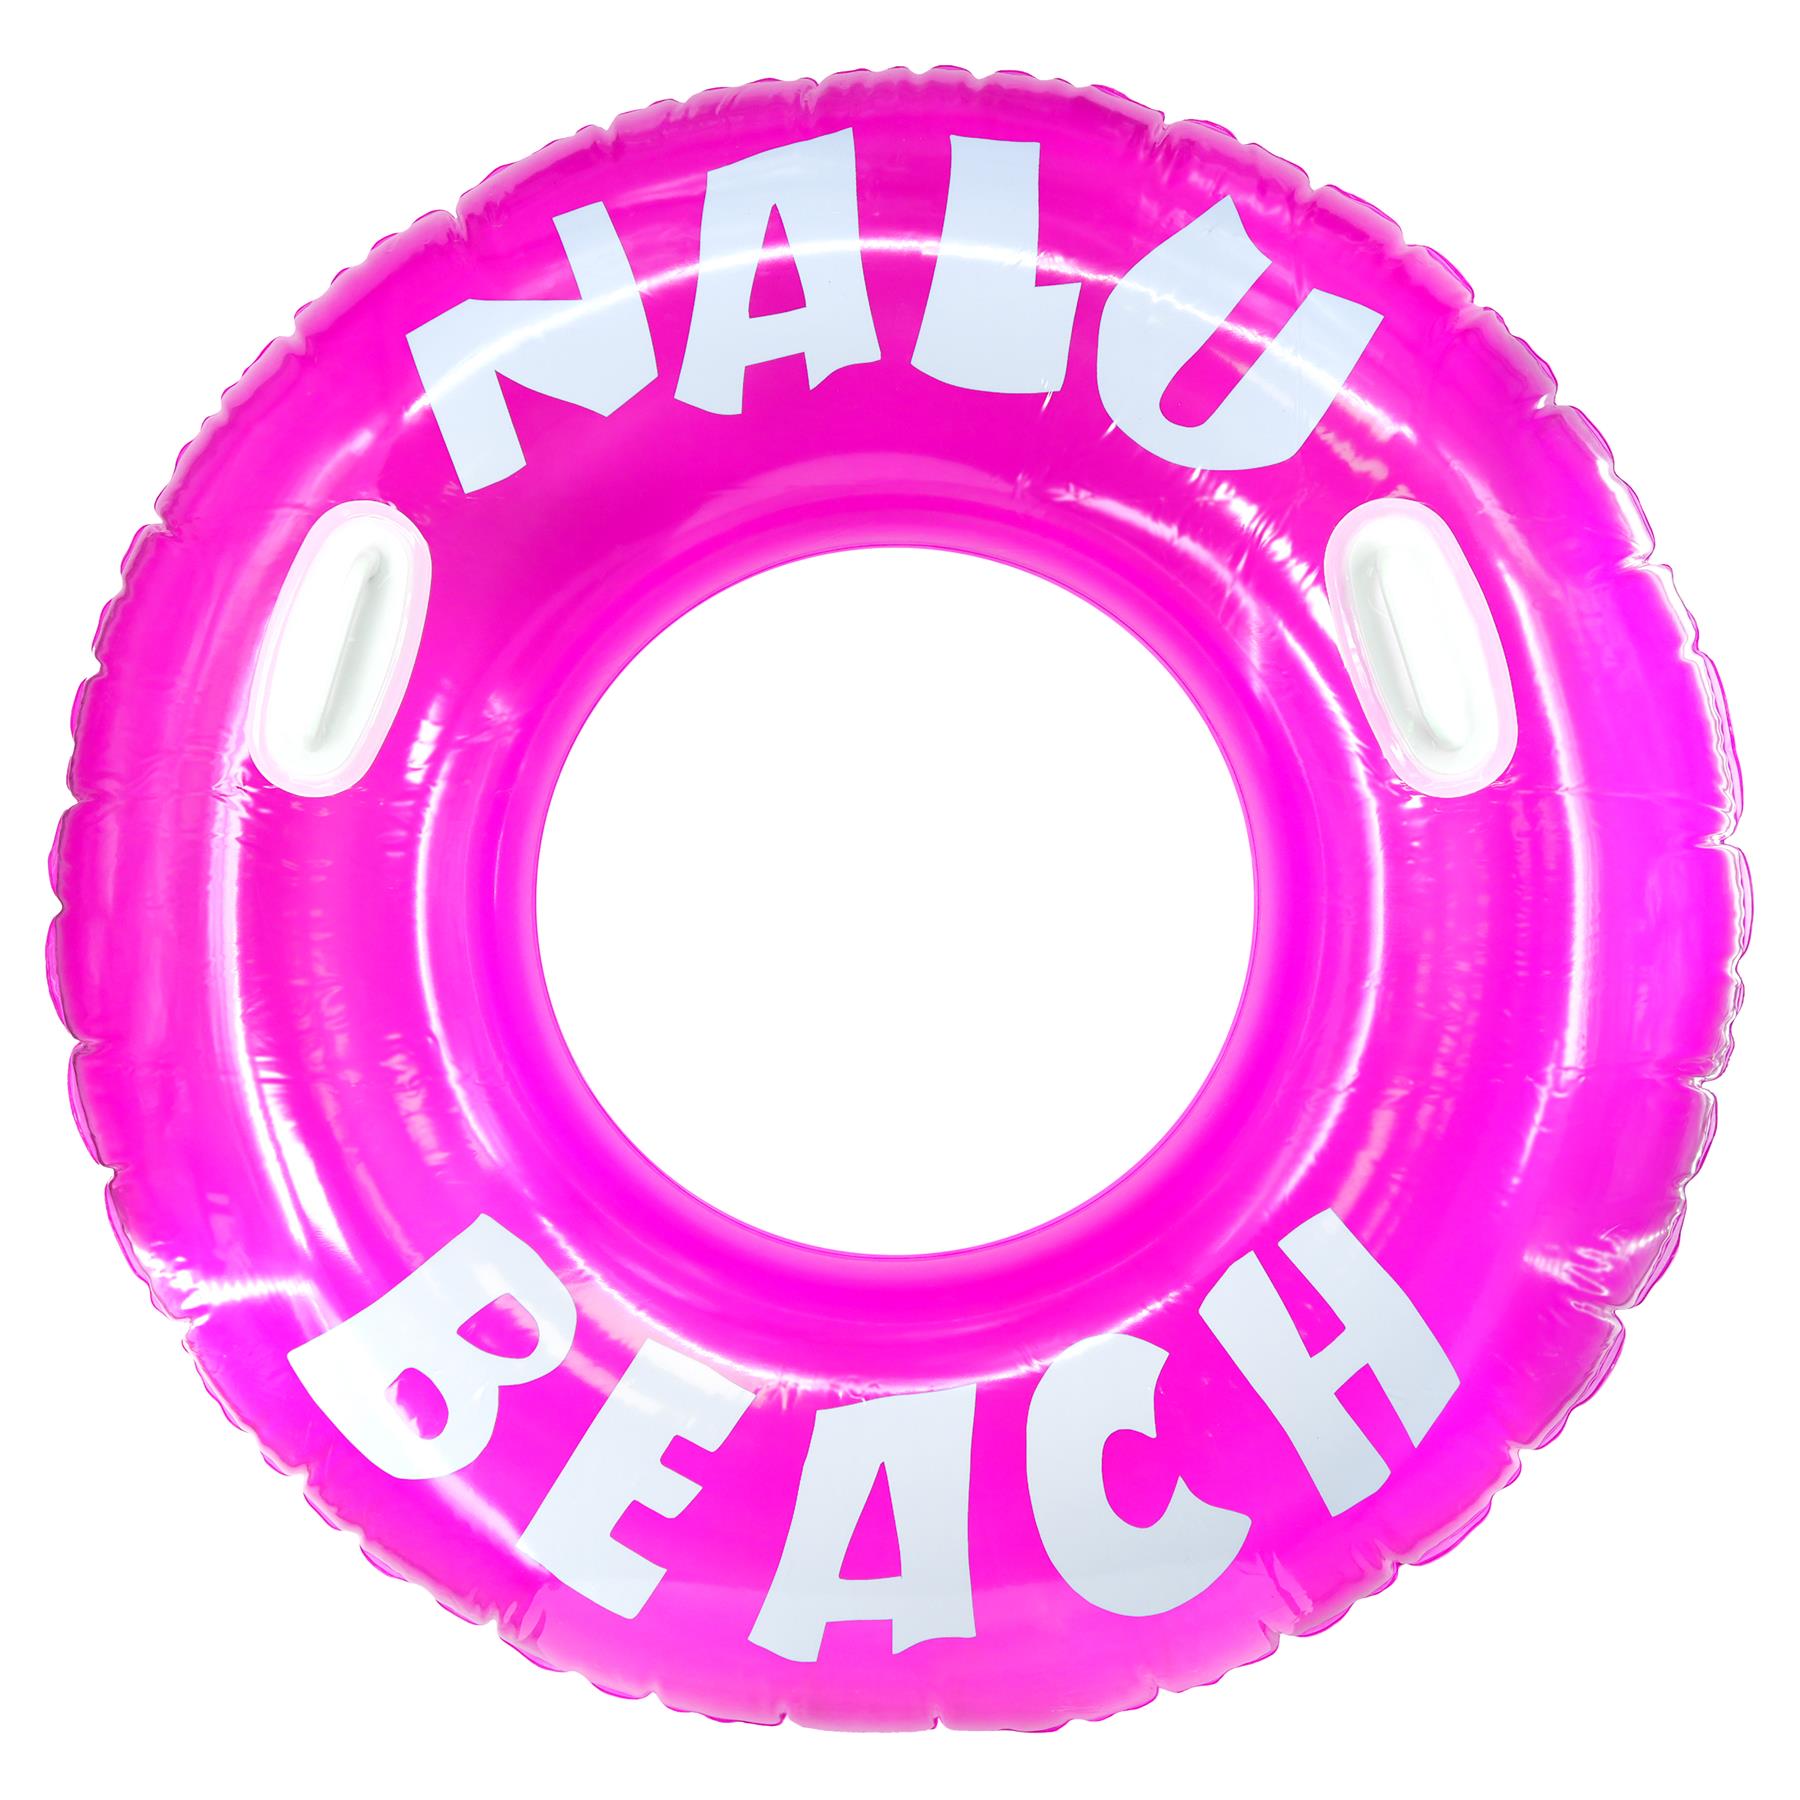 Nalu Pink Turbo Tyre Ring With Handles 47" by Nalu - The Magic Toy Shop